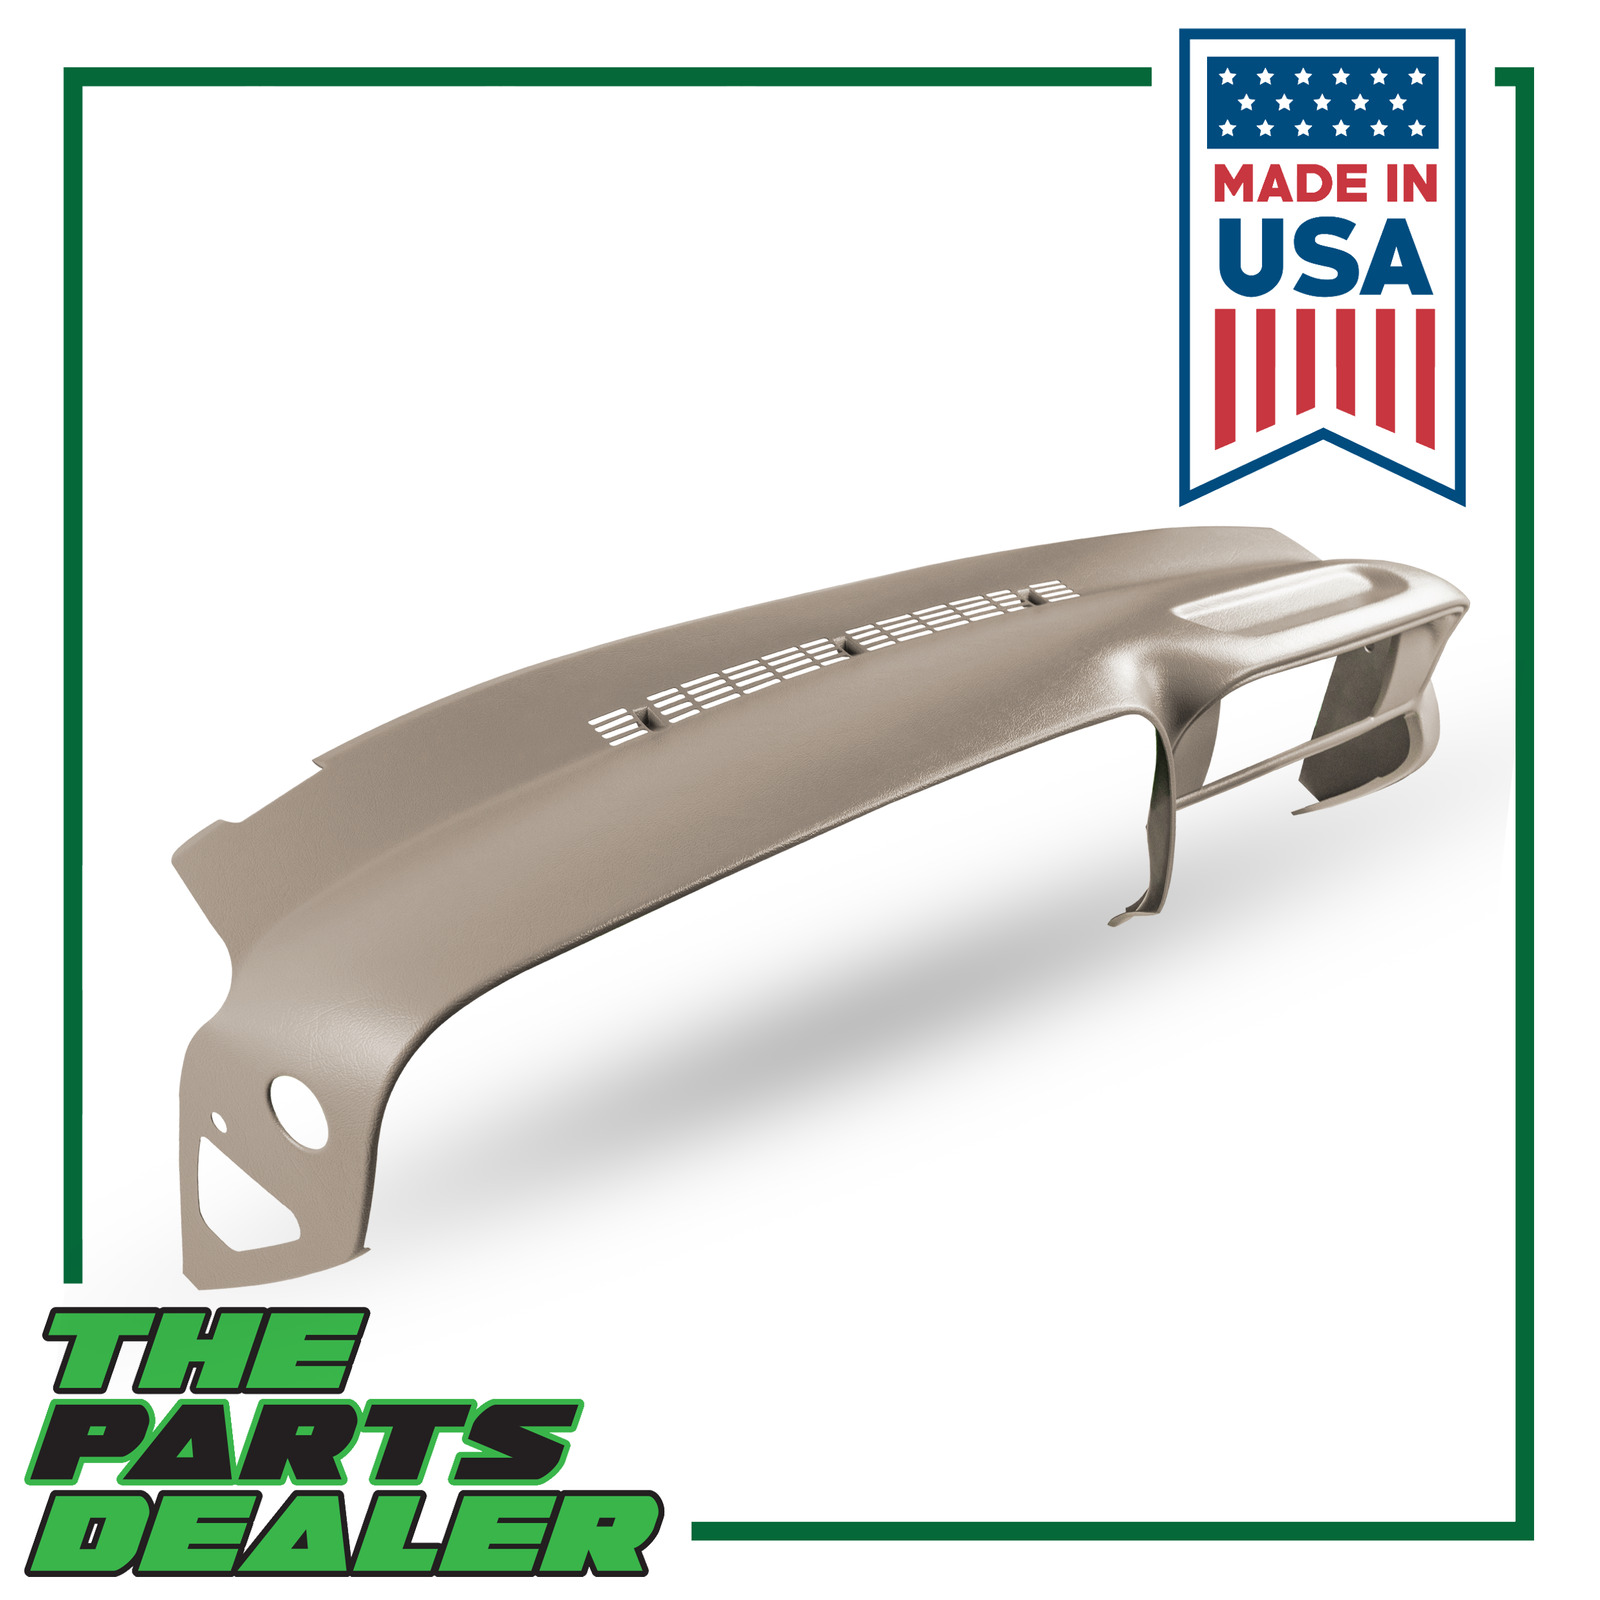 Molded Dash Cover Overlay for 1997-2000 C/K1500 Suburban Tahoe Escalade in Tan